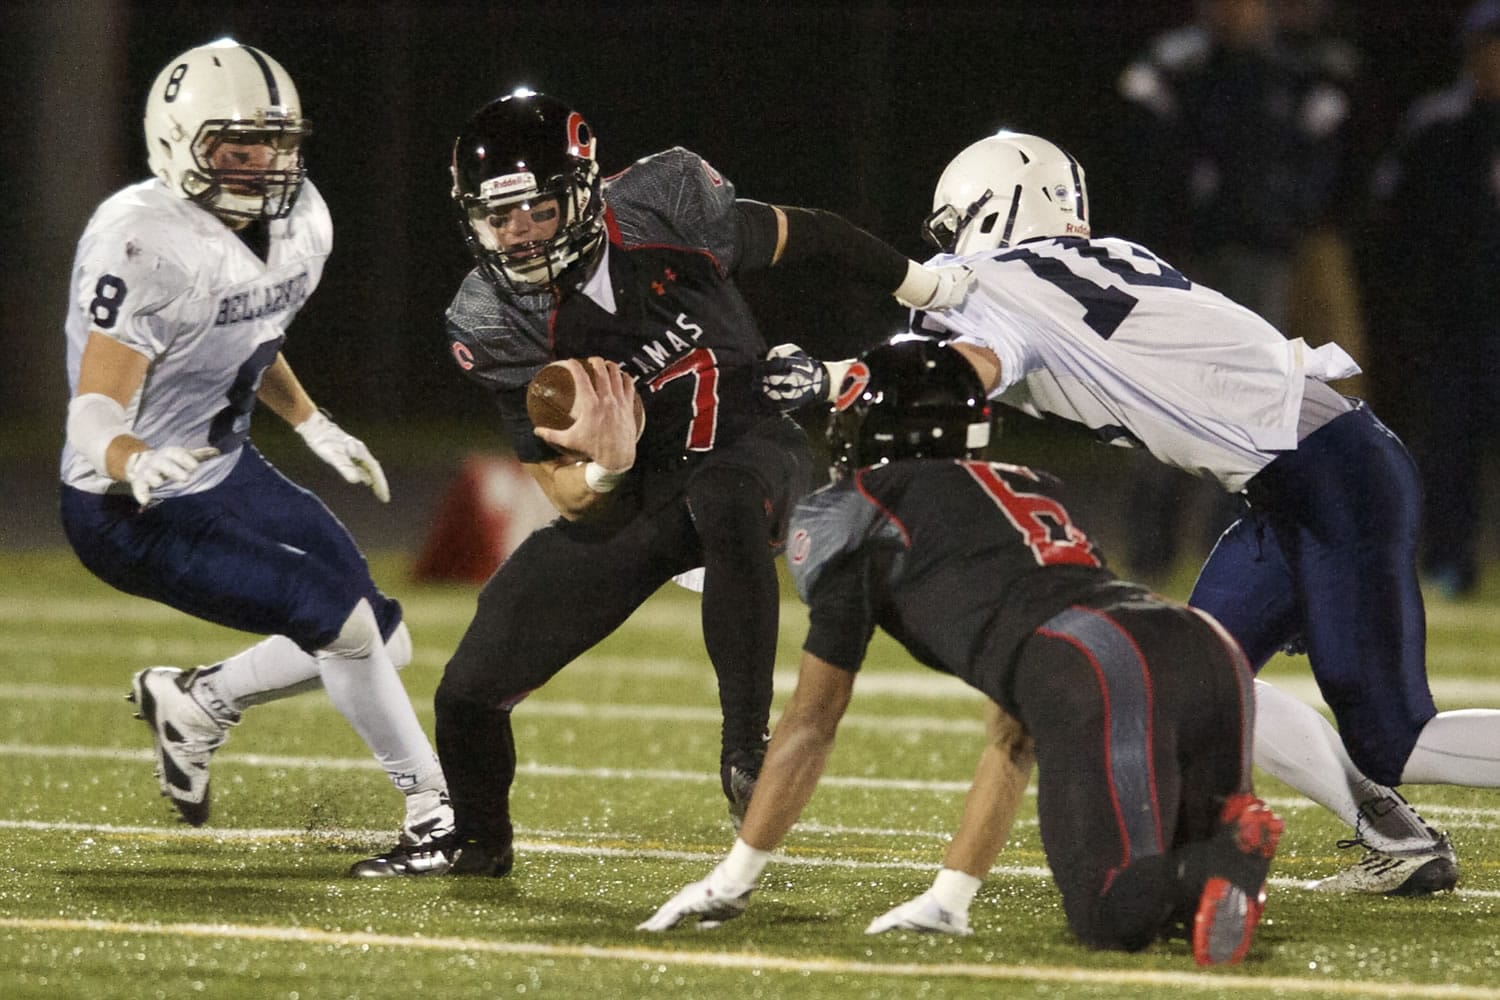 Camas quarterback Liam Fitzgerald (7) is taken down by the Bellarmine Prep defense Saturday in the Papermakers' loss in the opening round of the Class 4A football state playoffs.